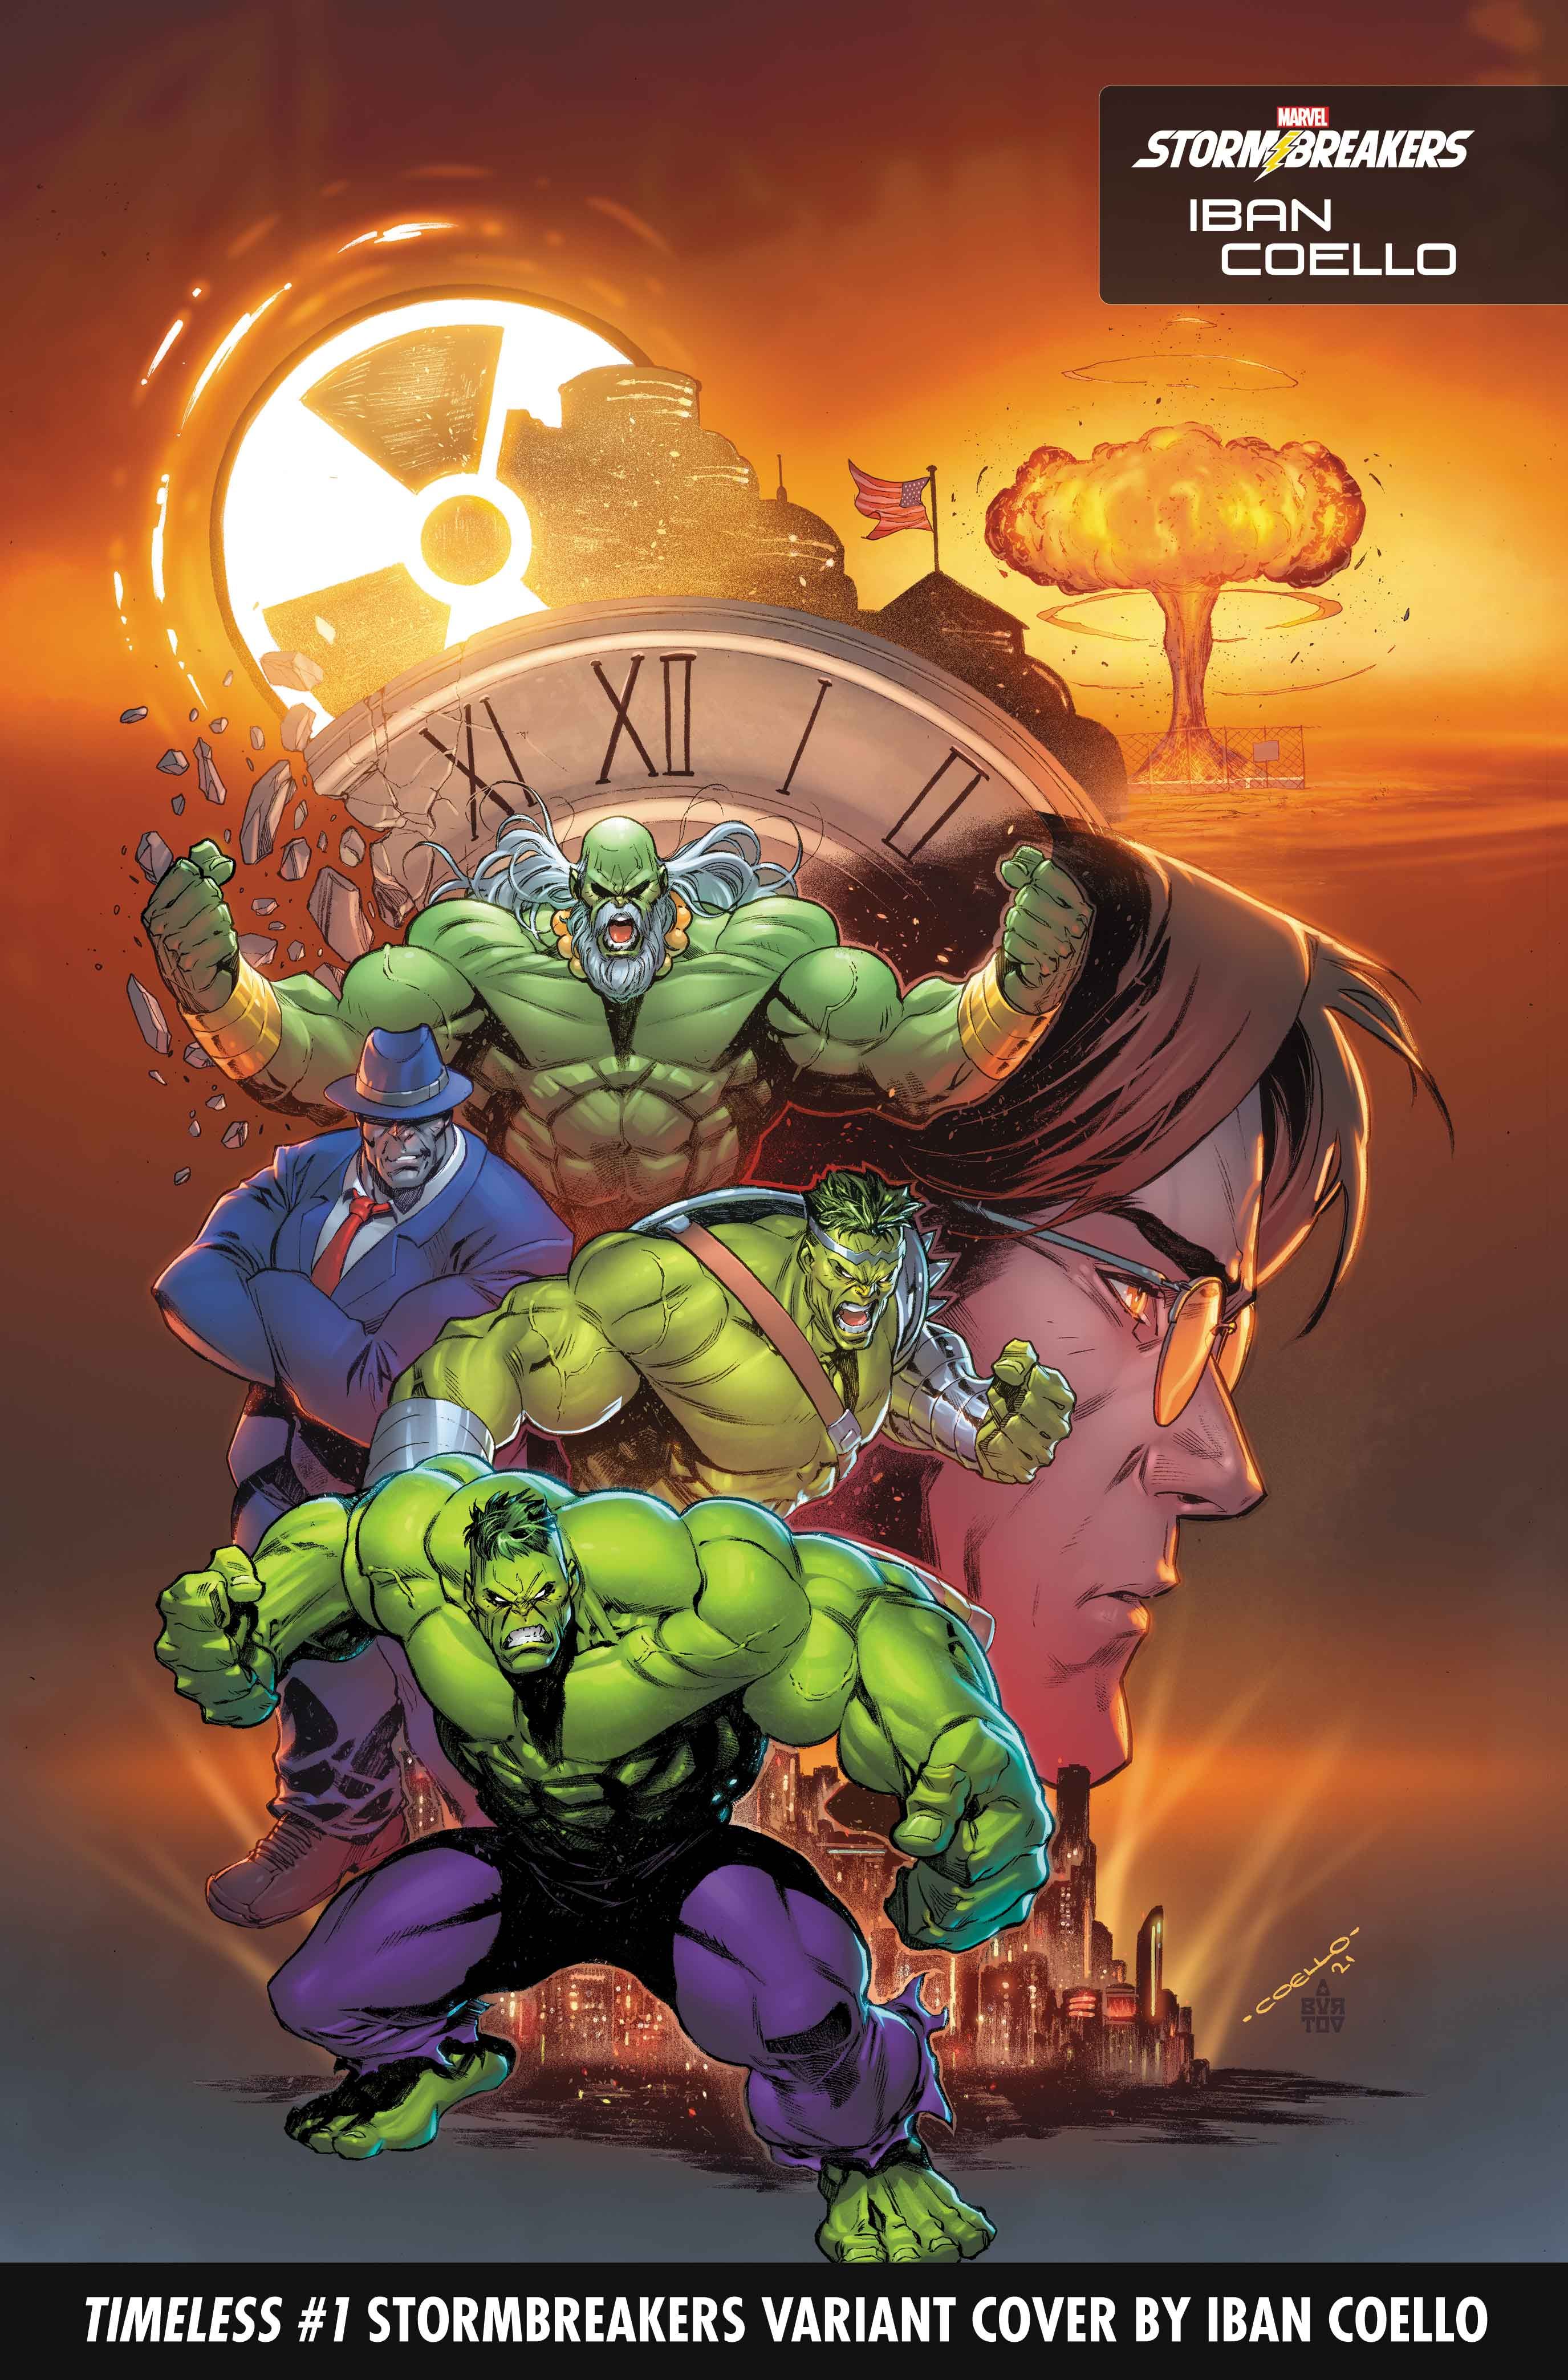 The Incredible Hulk on the cover of Timeless 1 Stormbreakers variant by Iban Coello